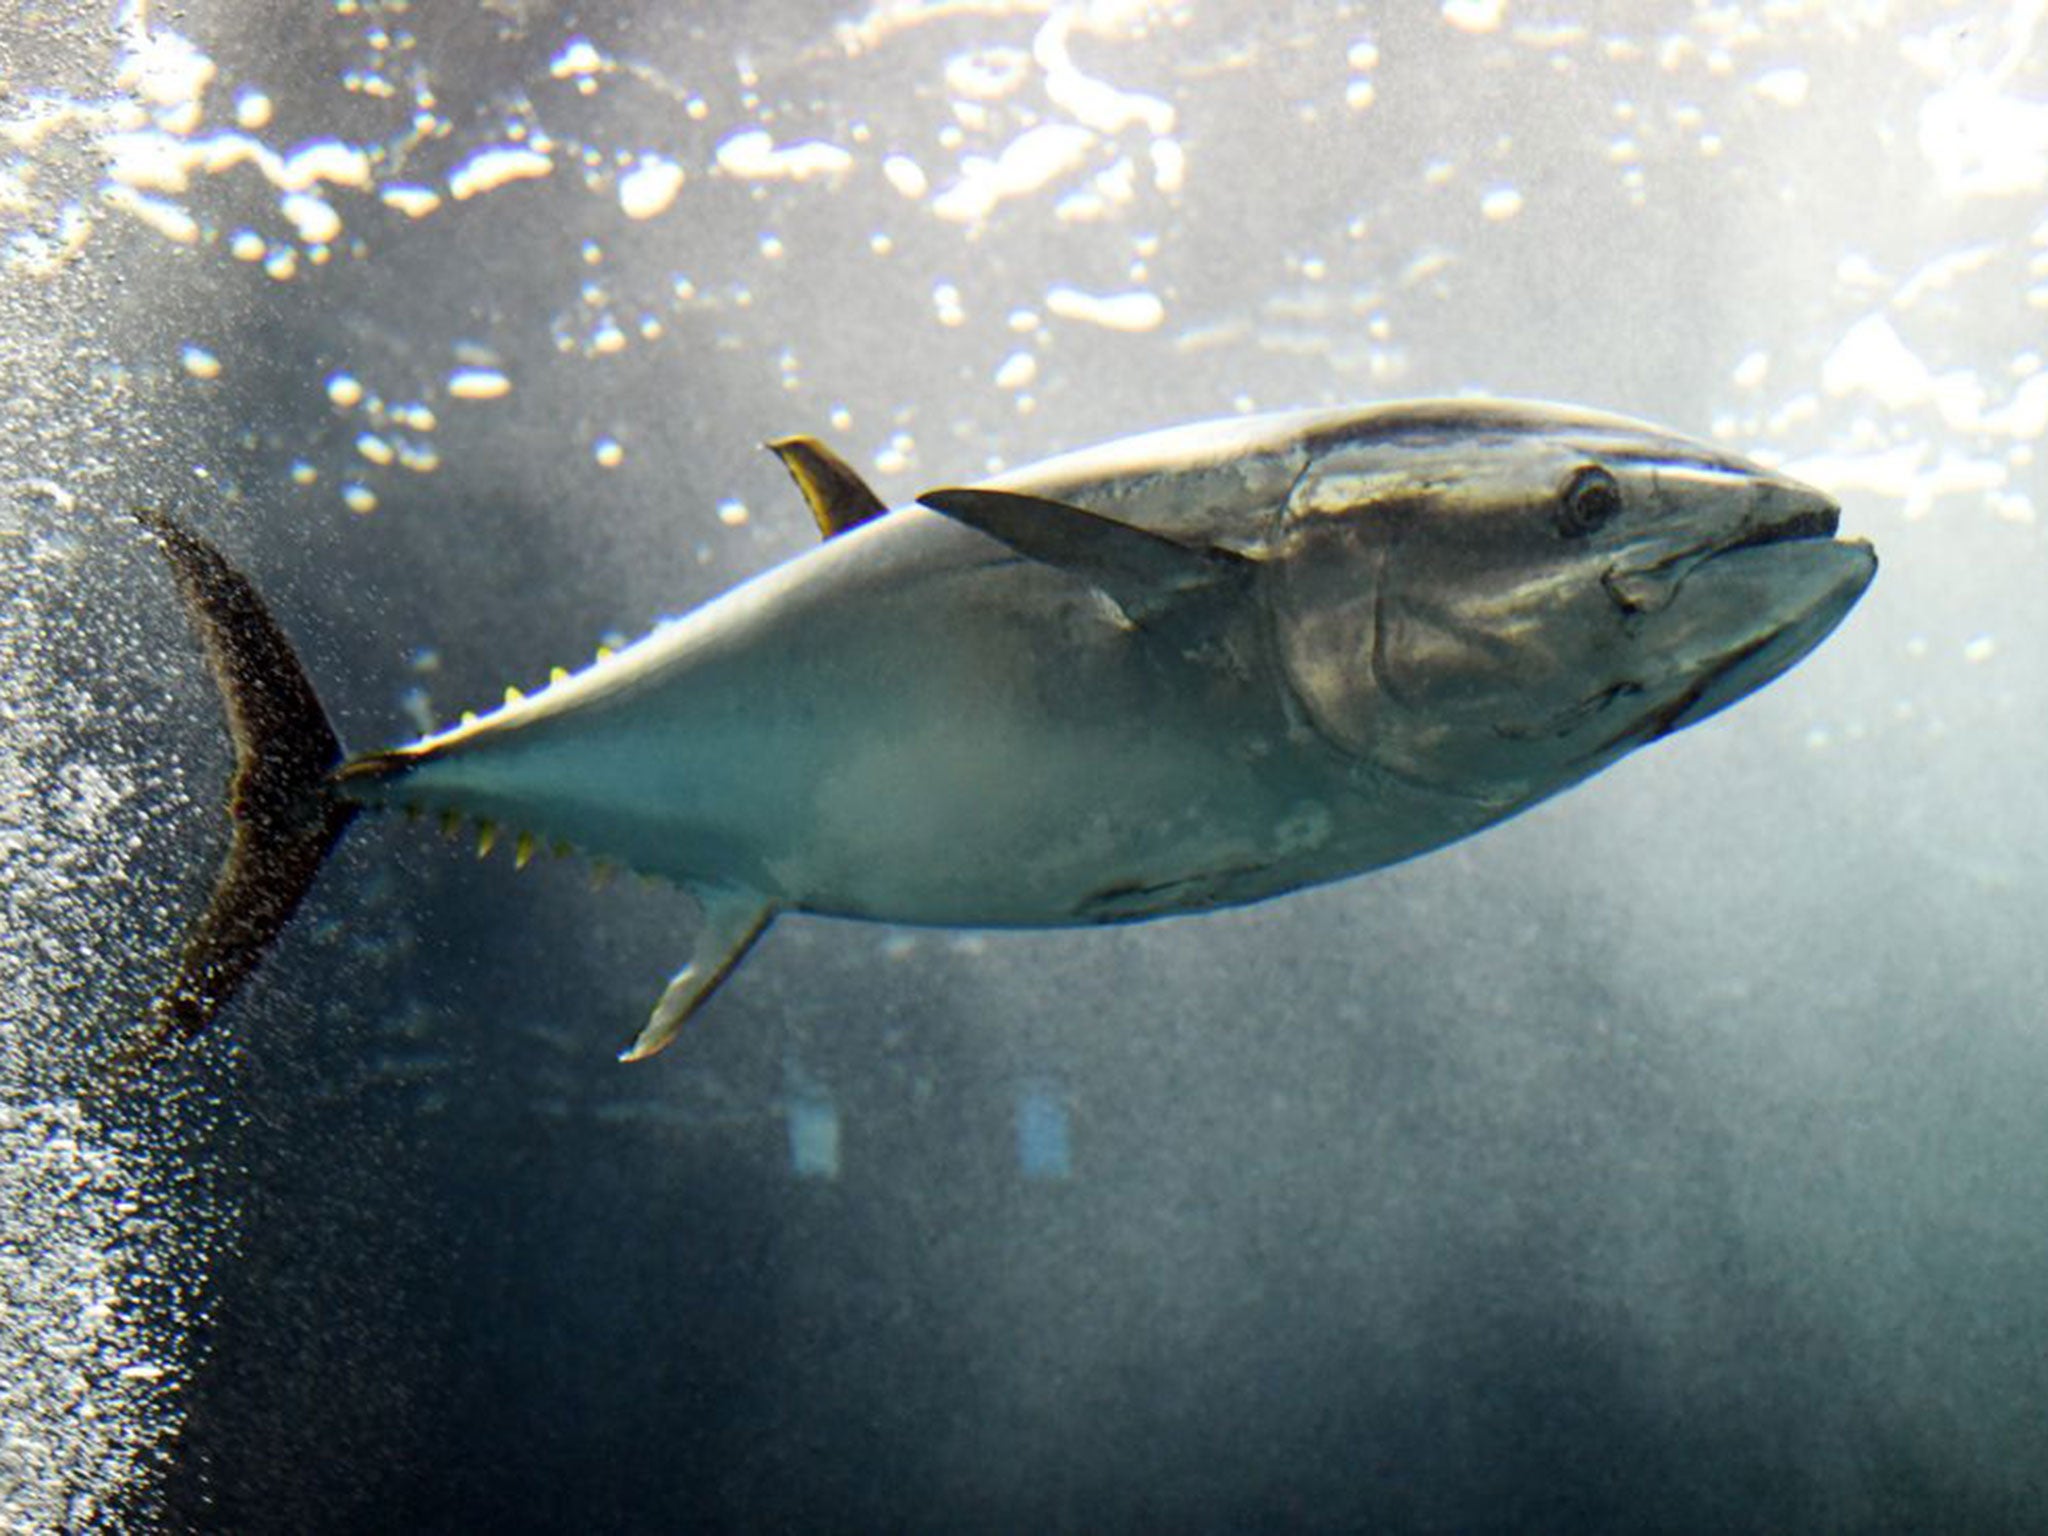 Sample of persistent organic pollutants were taken from yellowfin tuna